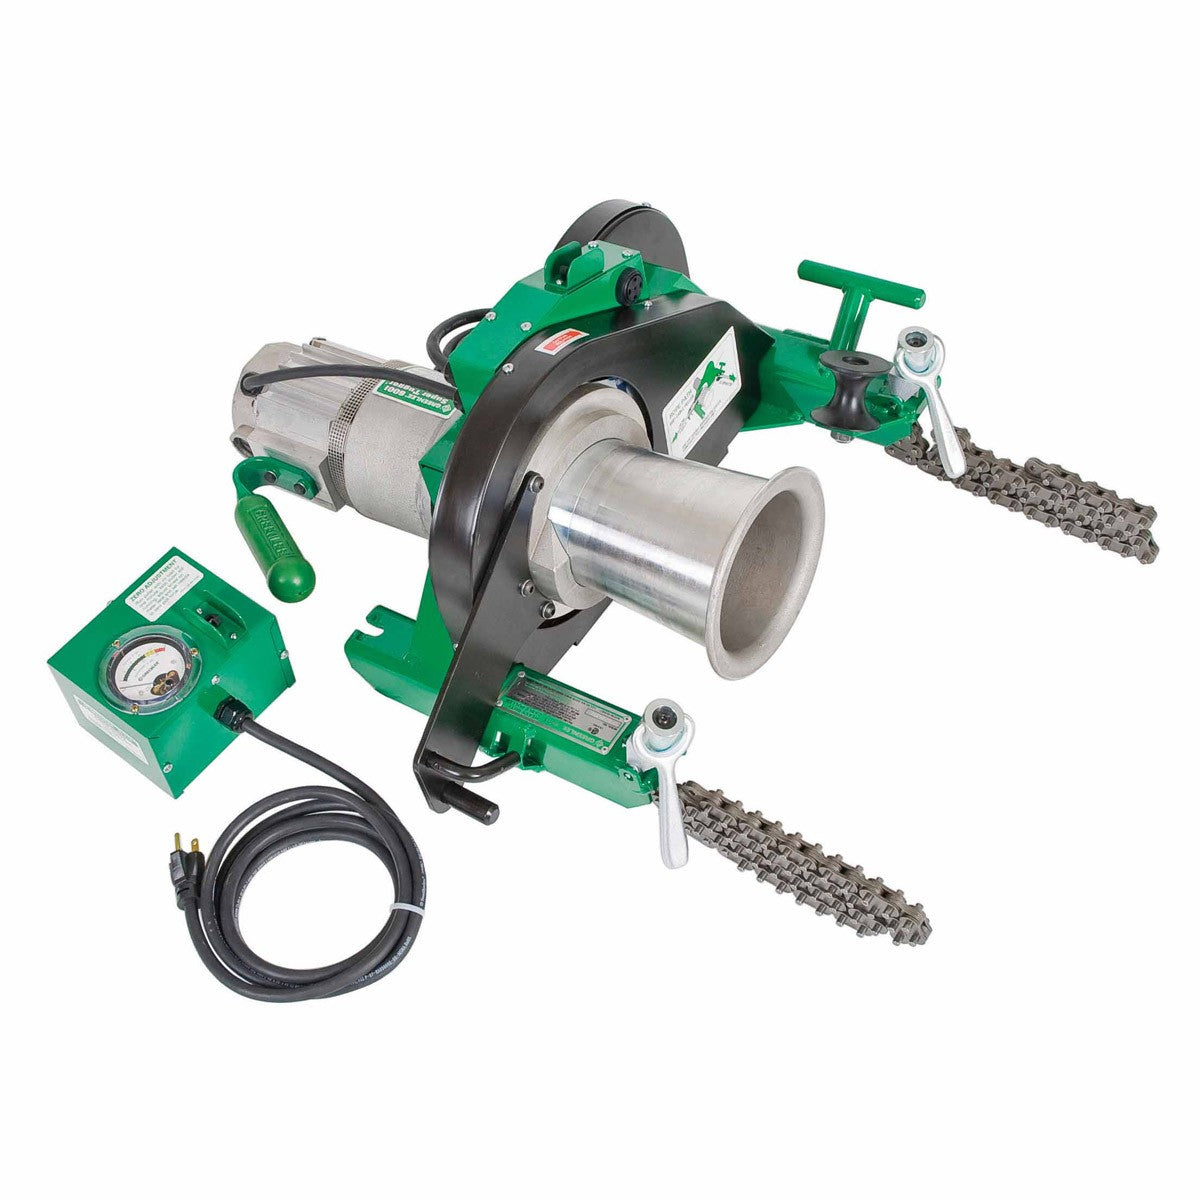 Greenlee 6001 Super Tugger Cable Puller Power Unit - 6500 lbs.